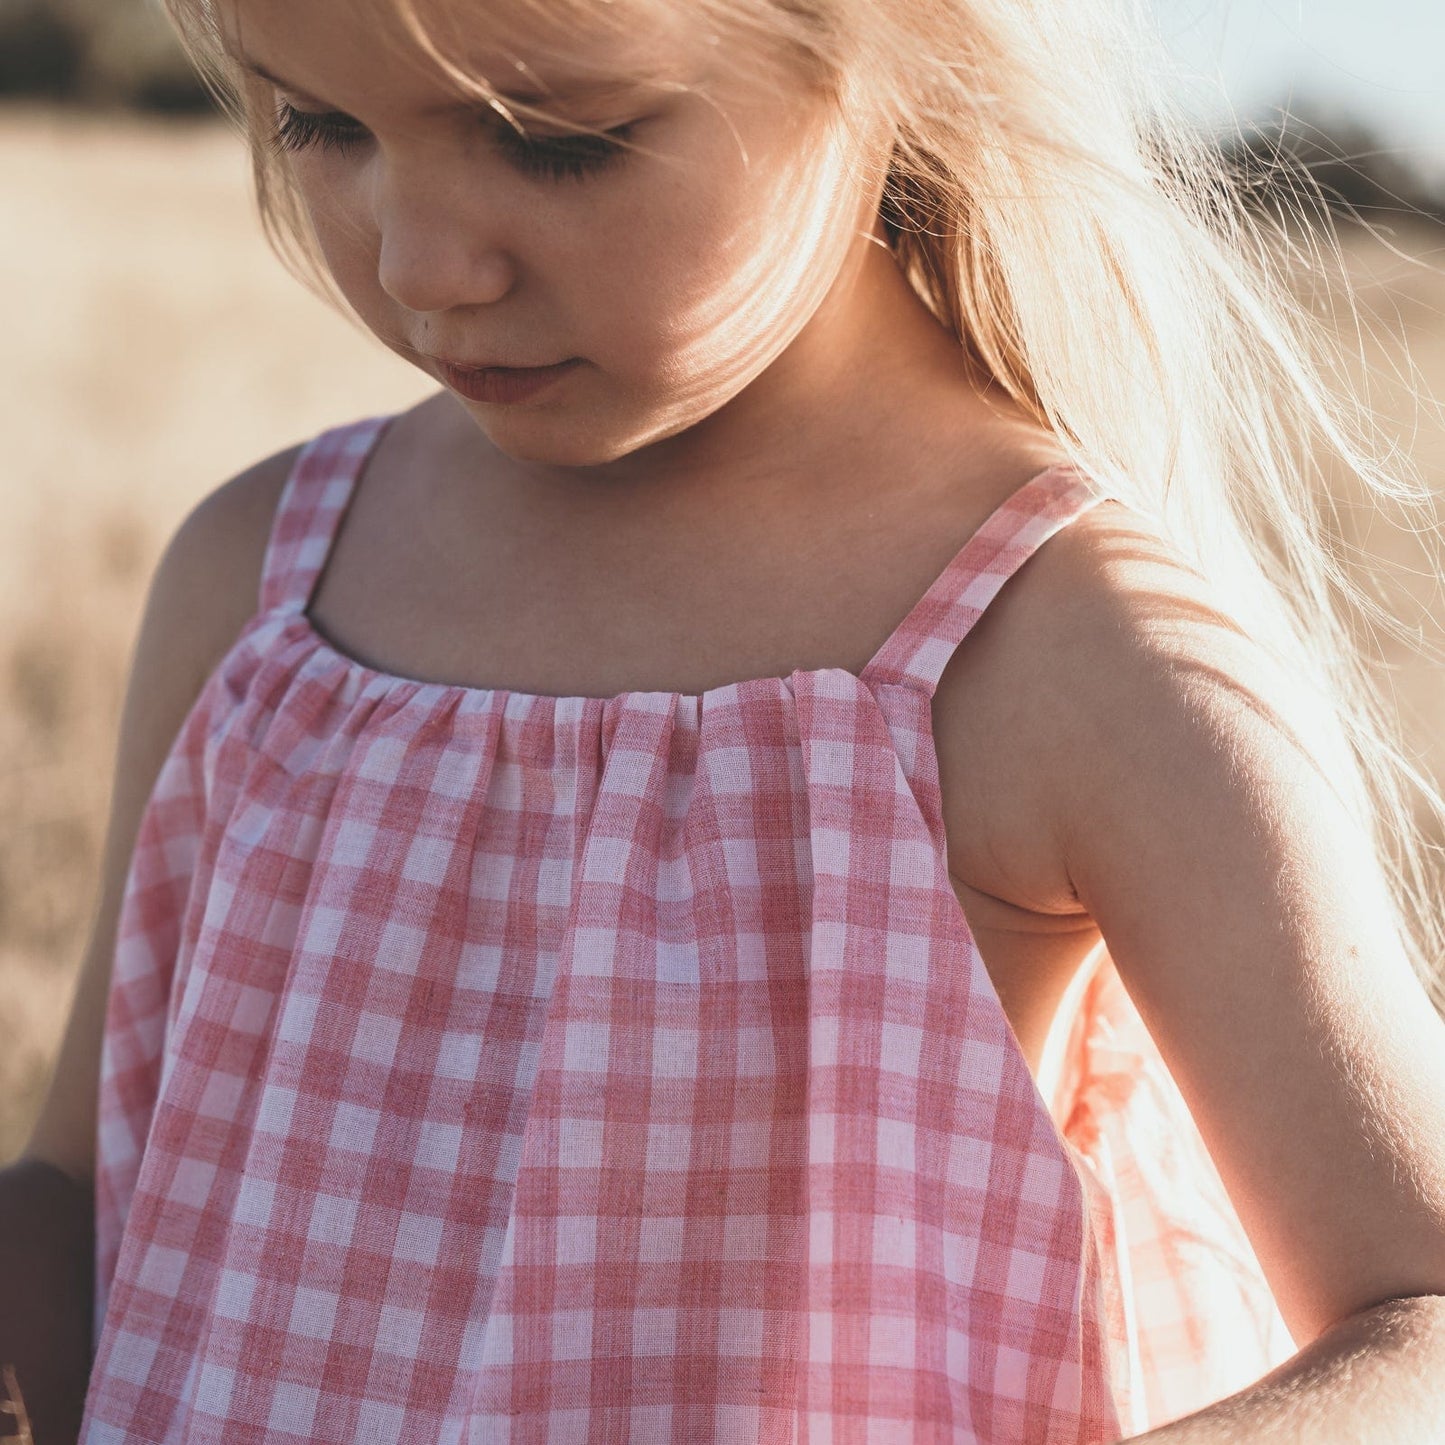 Girls Tiered Dress - Candy Check